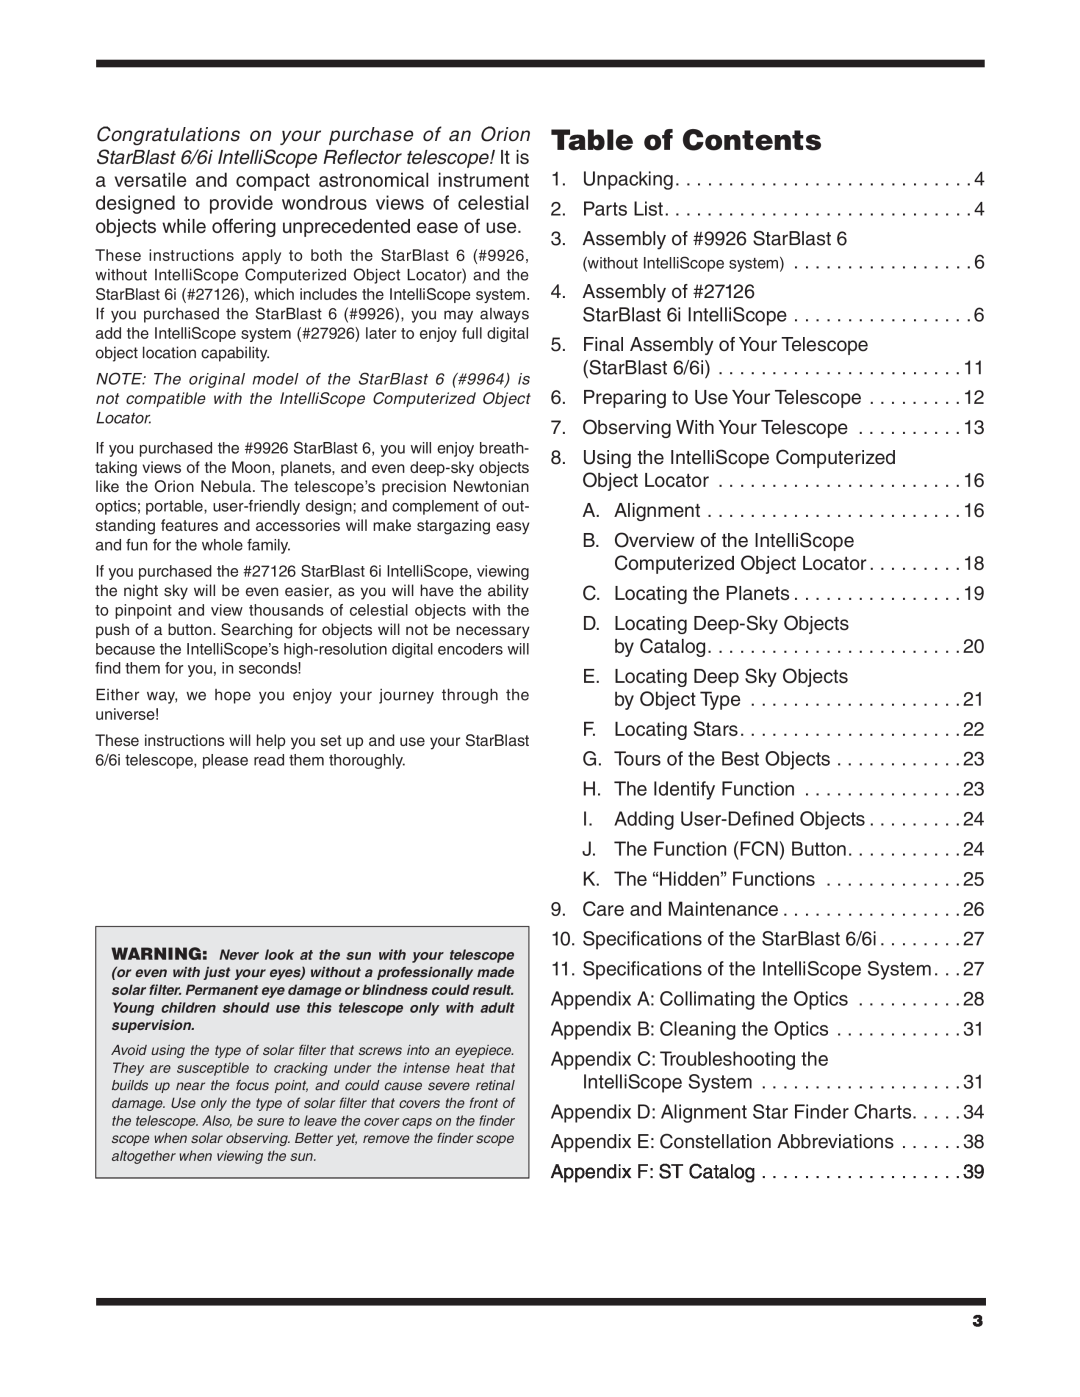 Orion 6/6I instruction manual Table of Contents 